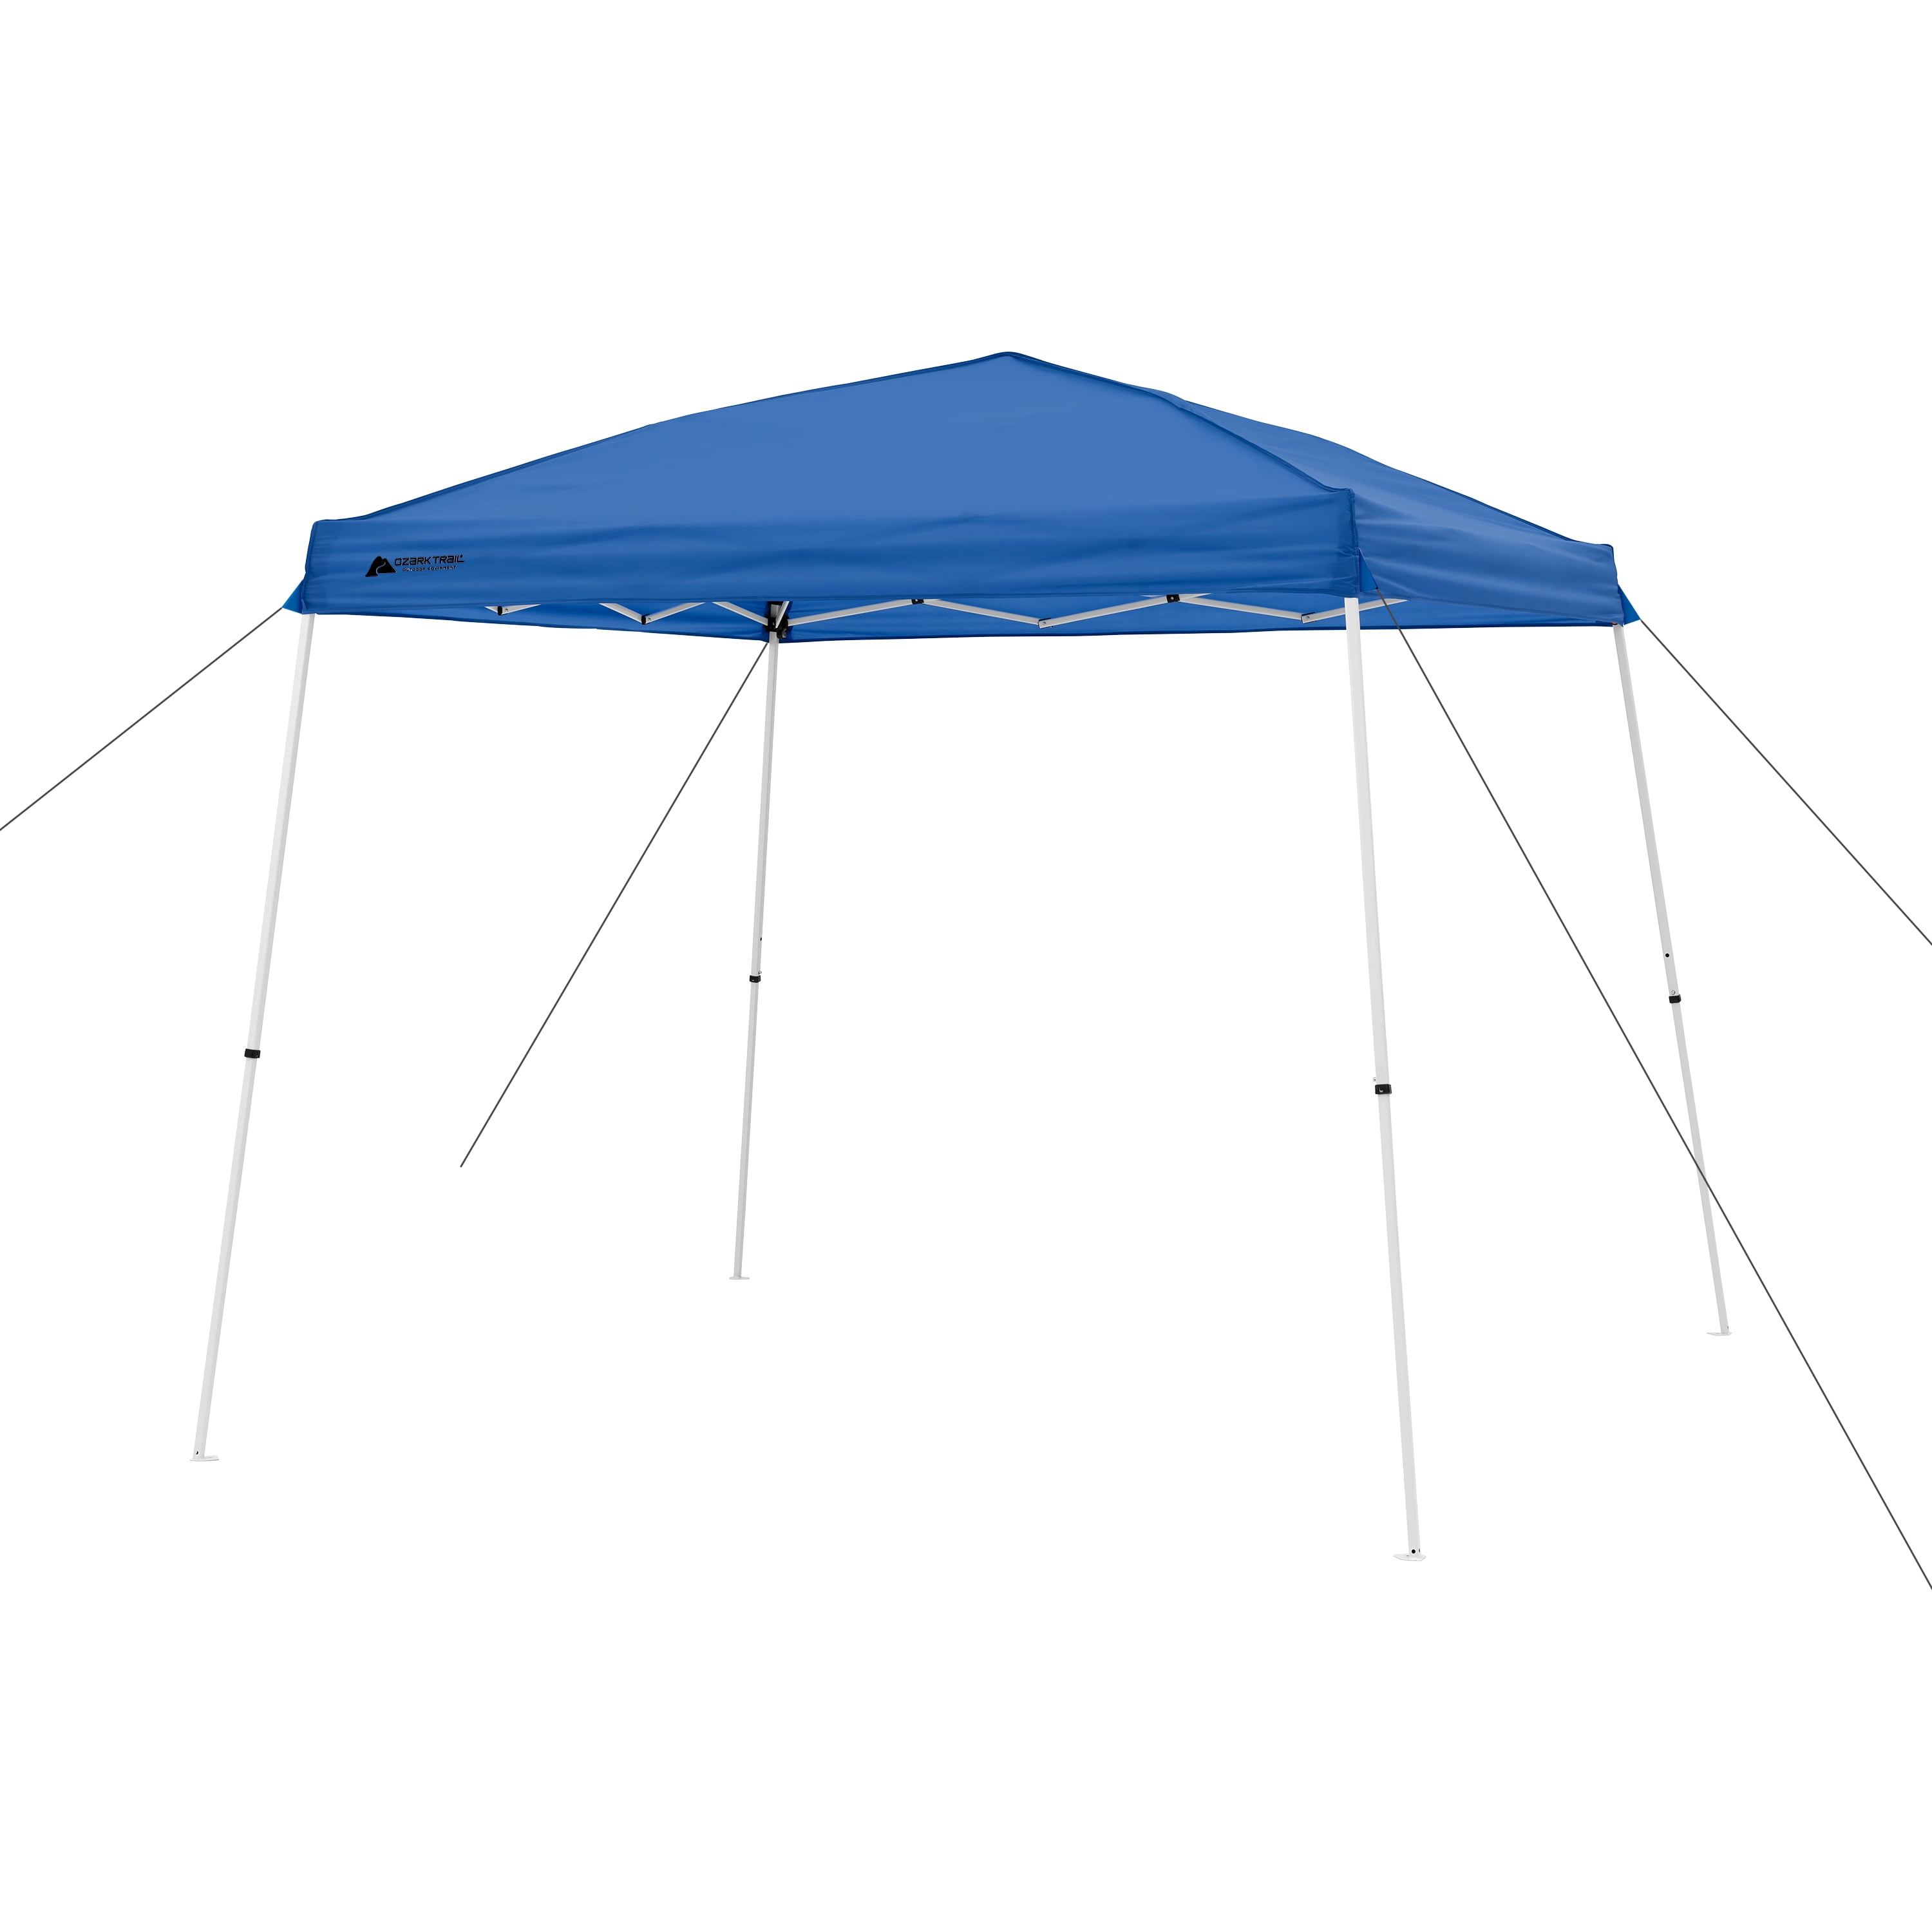 Ozark Trail First Up Gazebo Canopy 10 X10 INNER LEG Lower Part Replacement Parts 